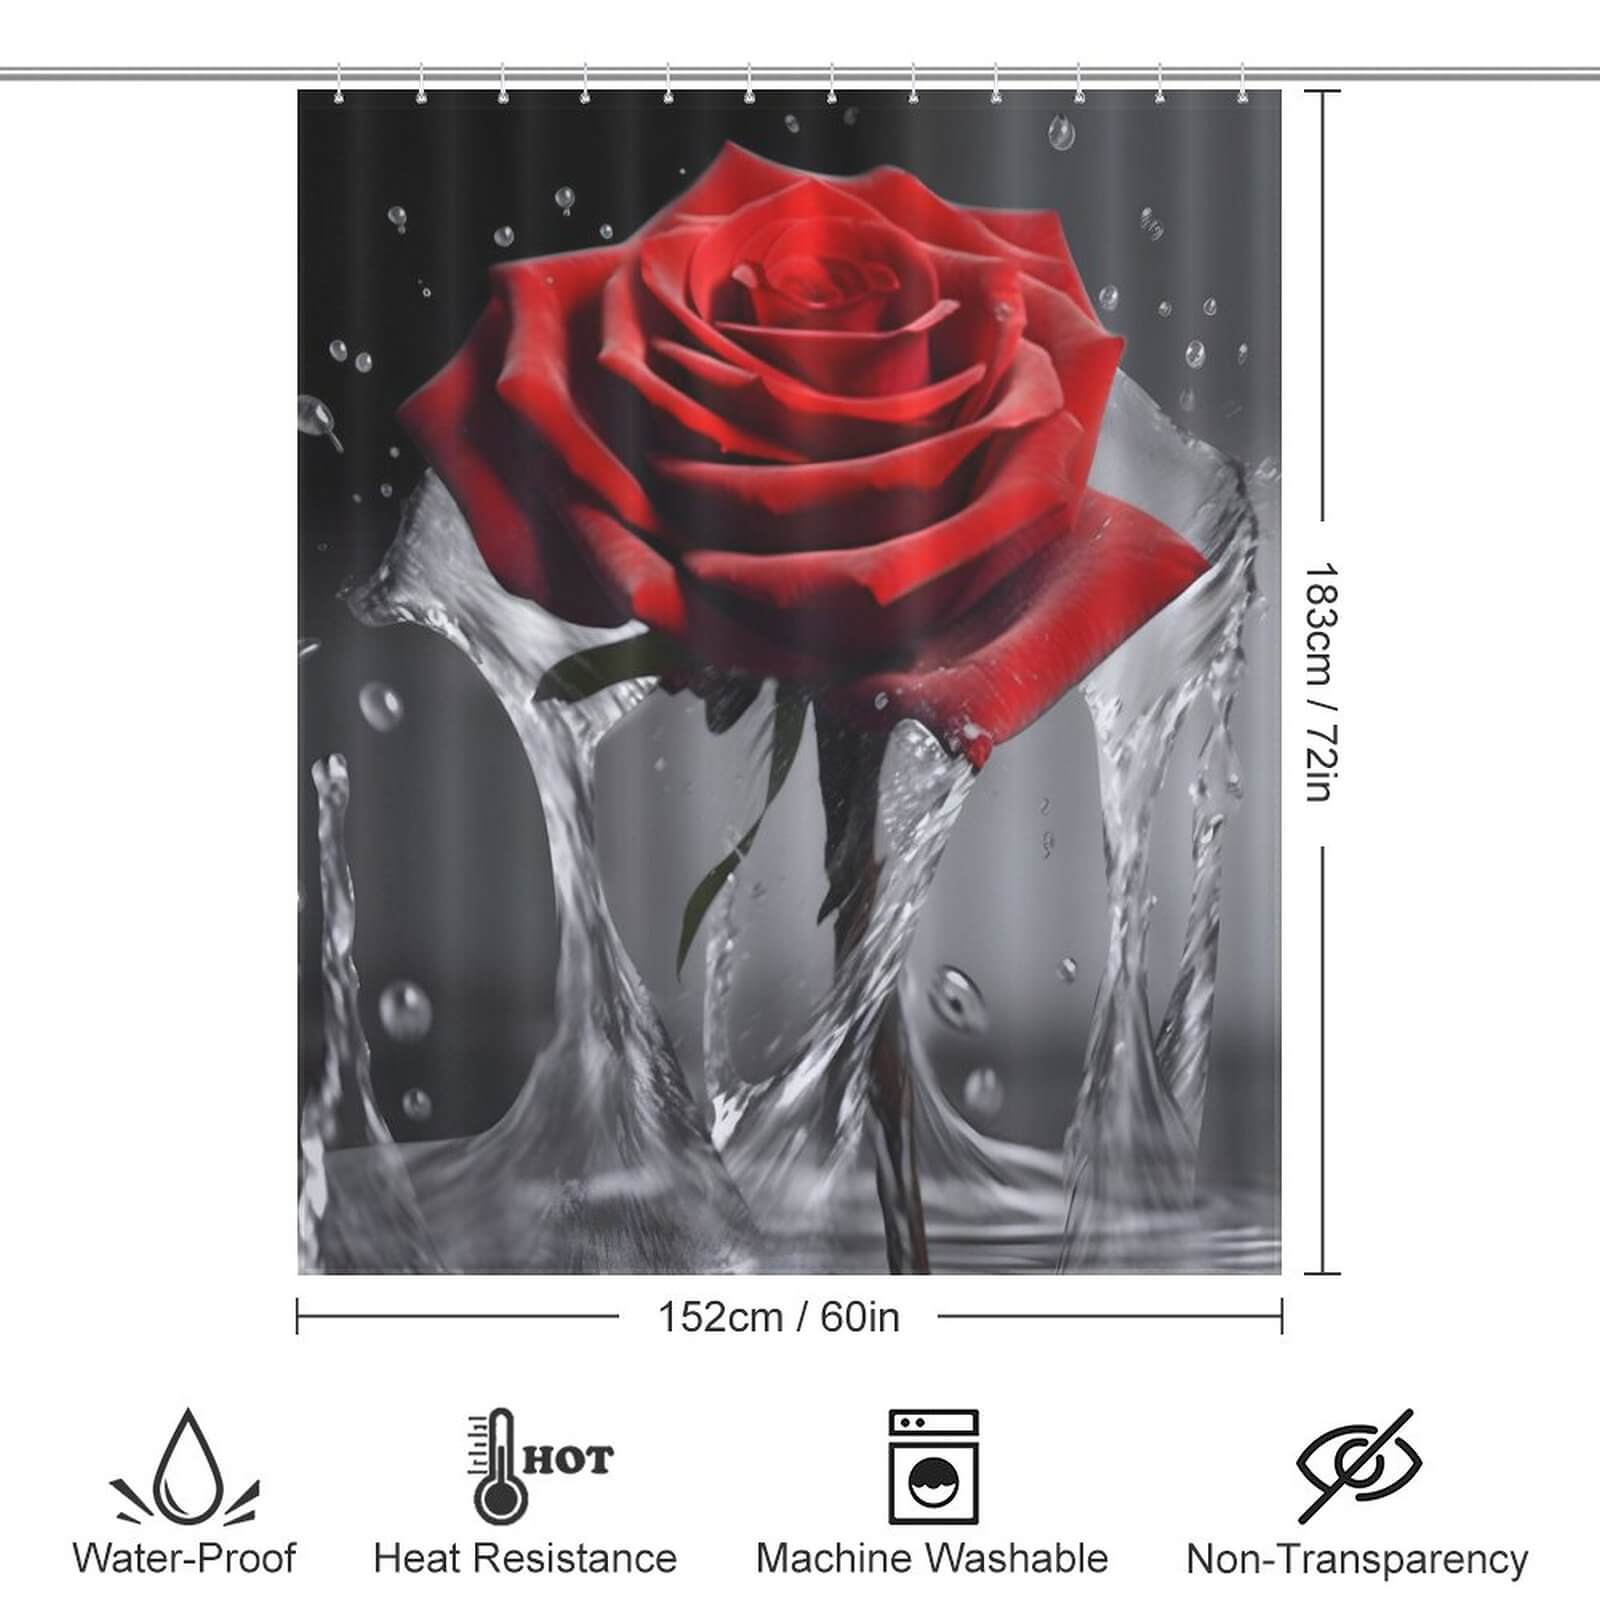 This Cotton Cat waterproof Red Rose 3D Shower Curtain features a captivating red rose immersed in water.